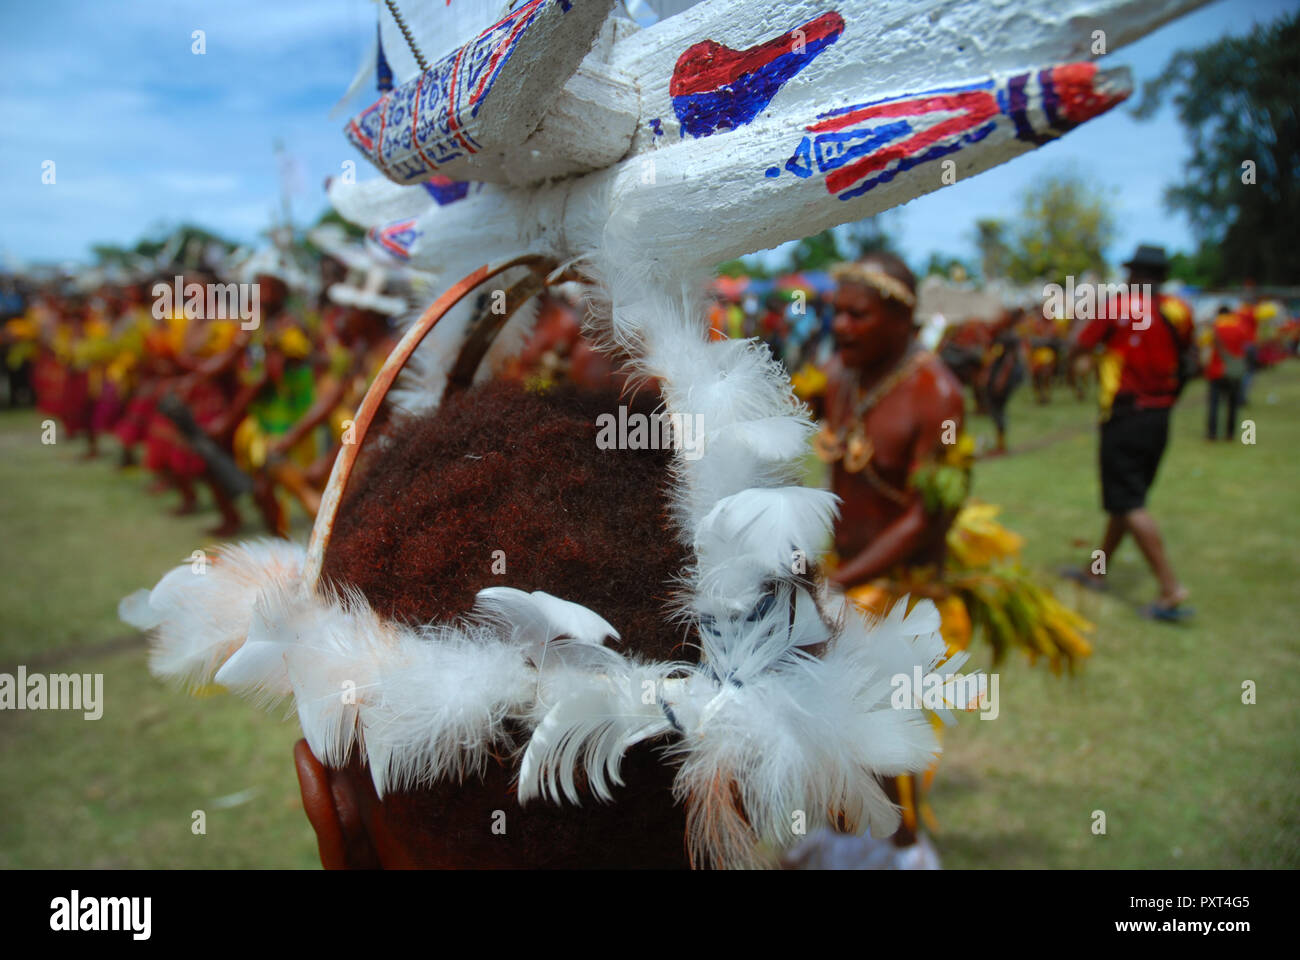 Colourfully dressed and face painted men with boat hat designs dancing as part of a Sing Sing in Madang, Papua New Guinea. Stock Photo